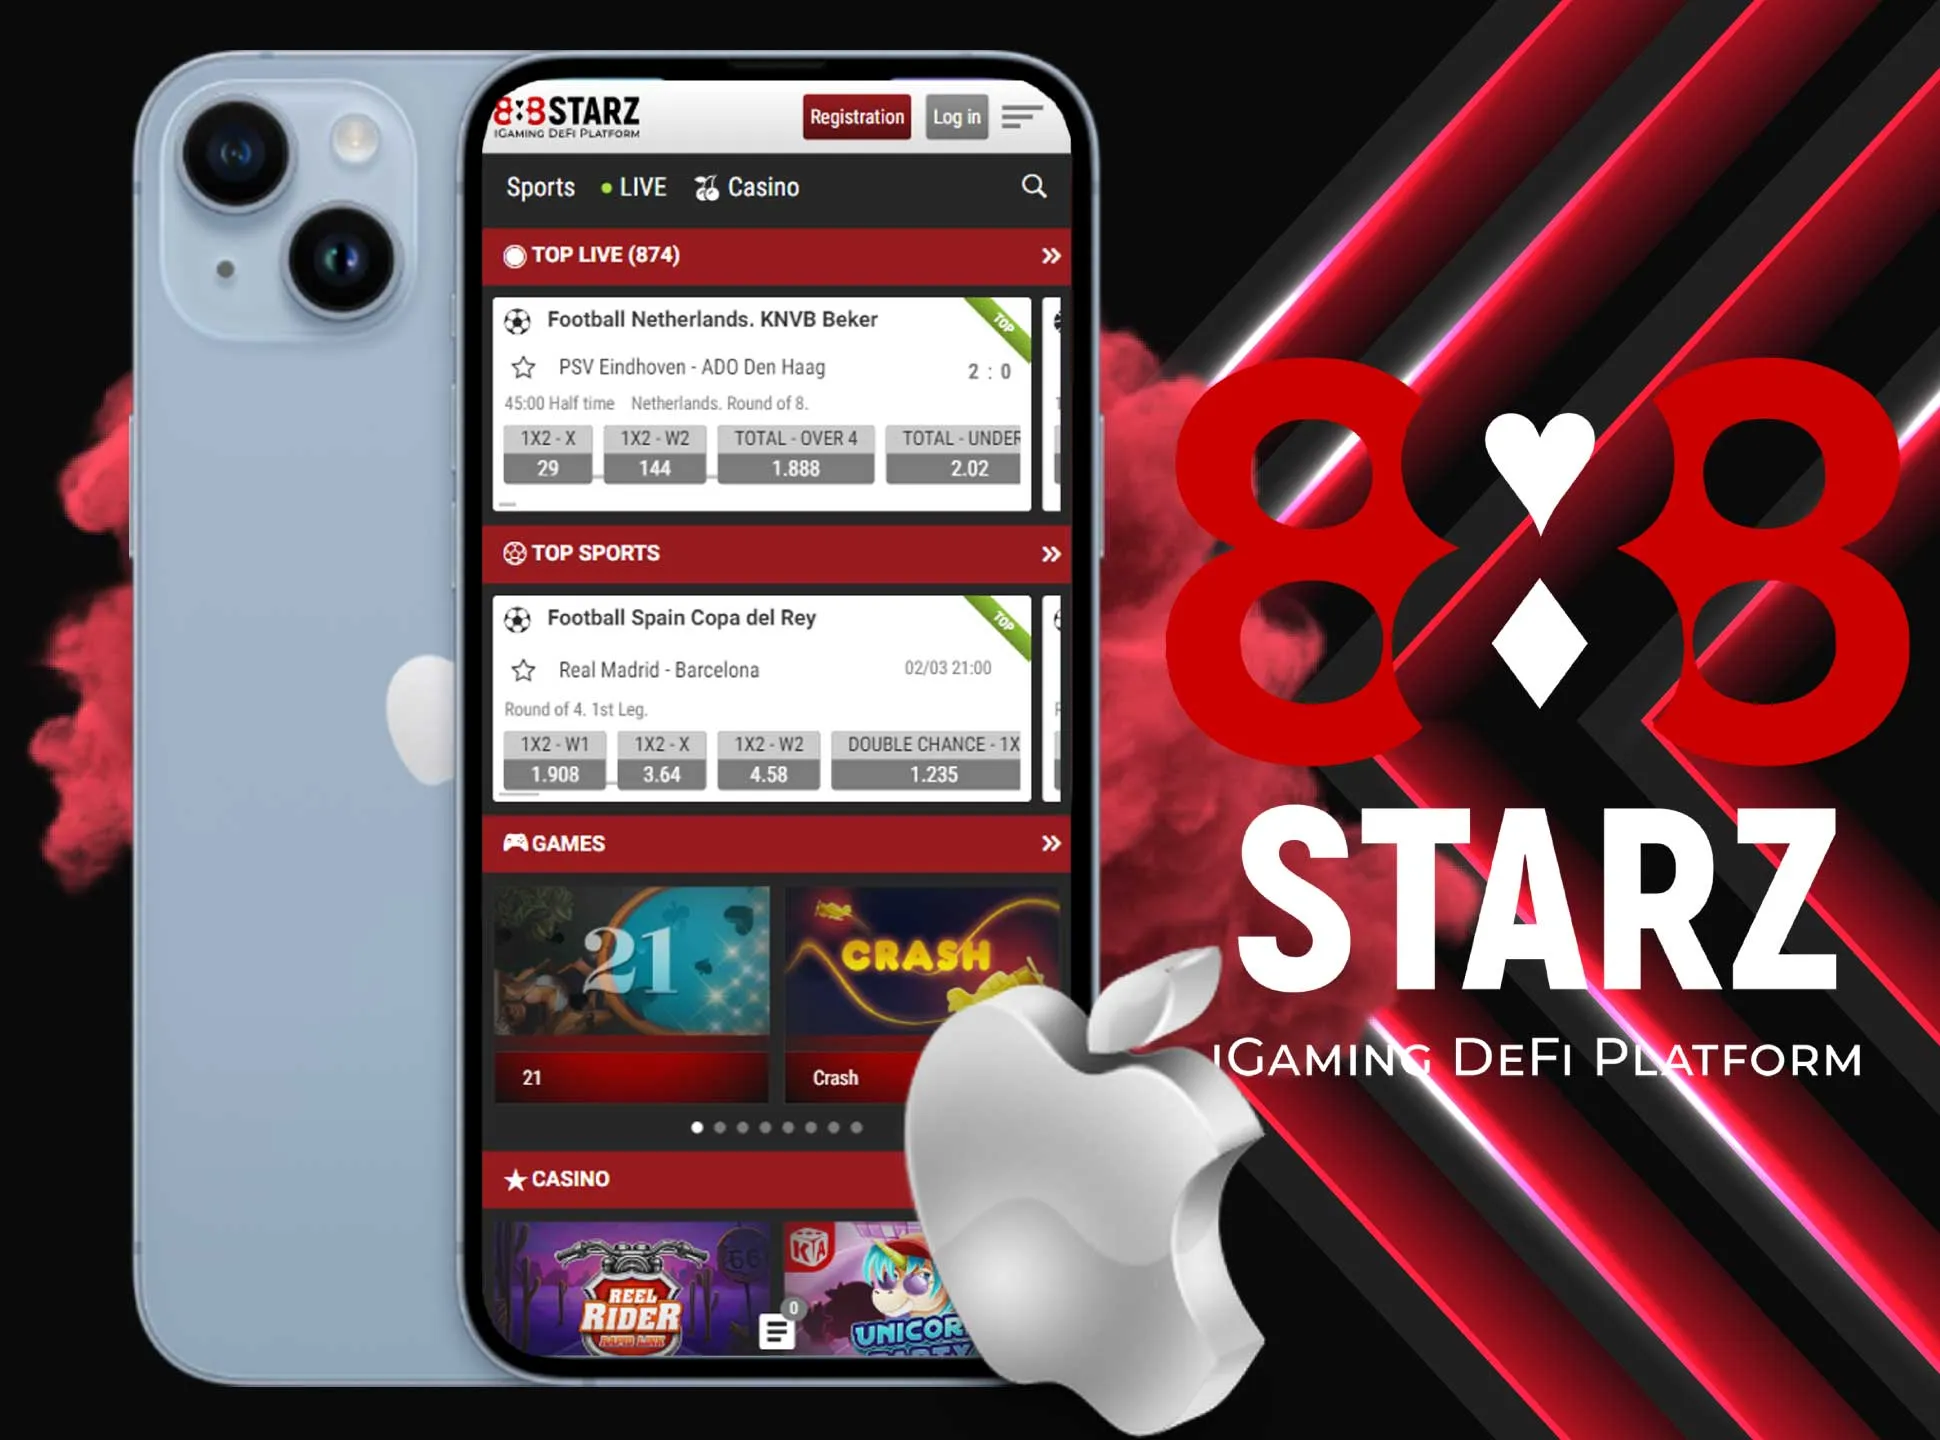 You can install the 888starz app on your iPhone.